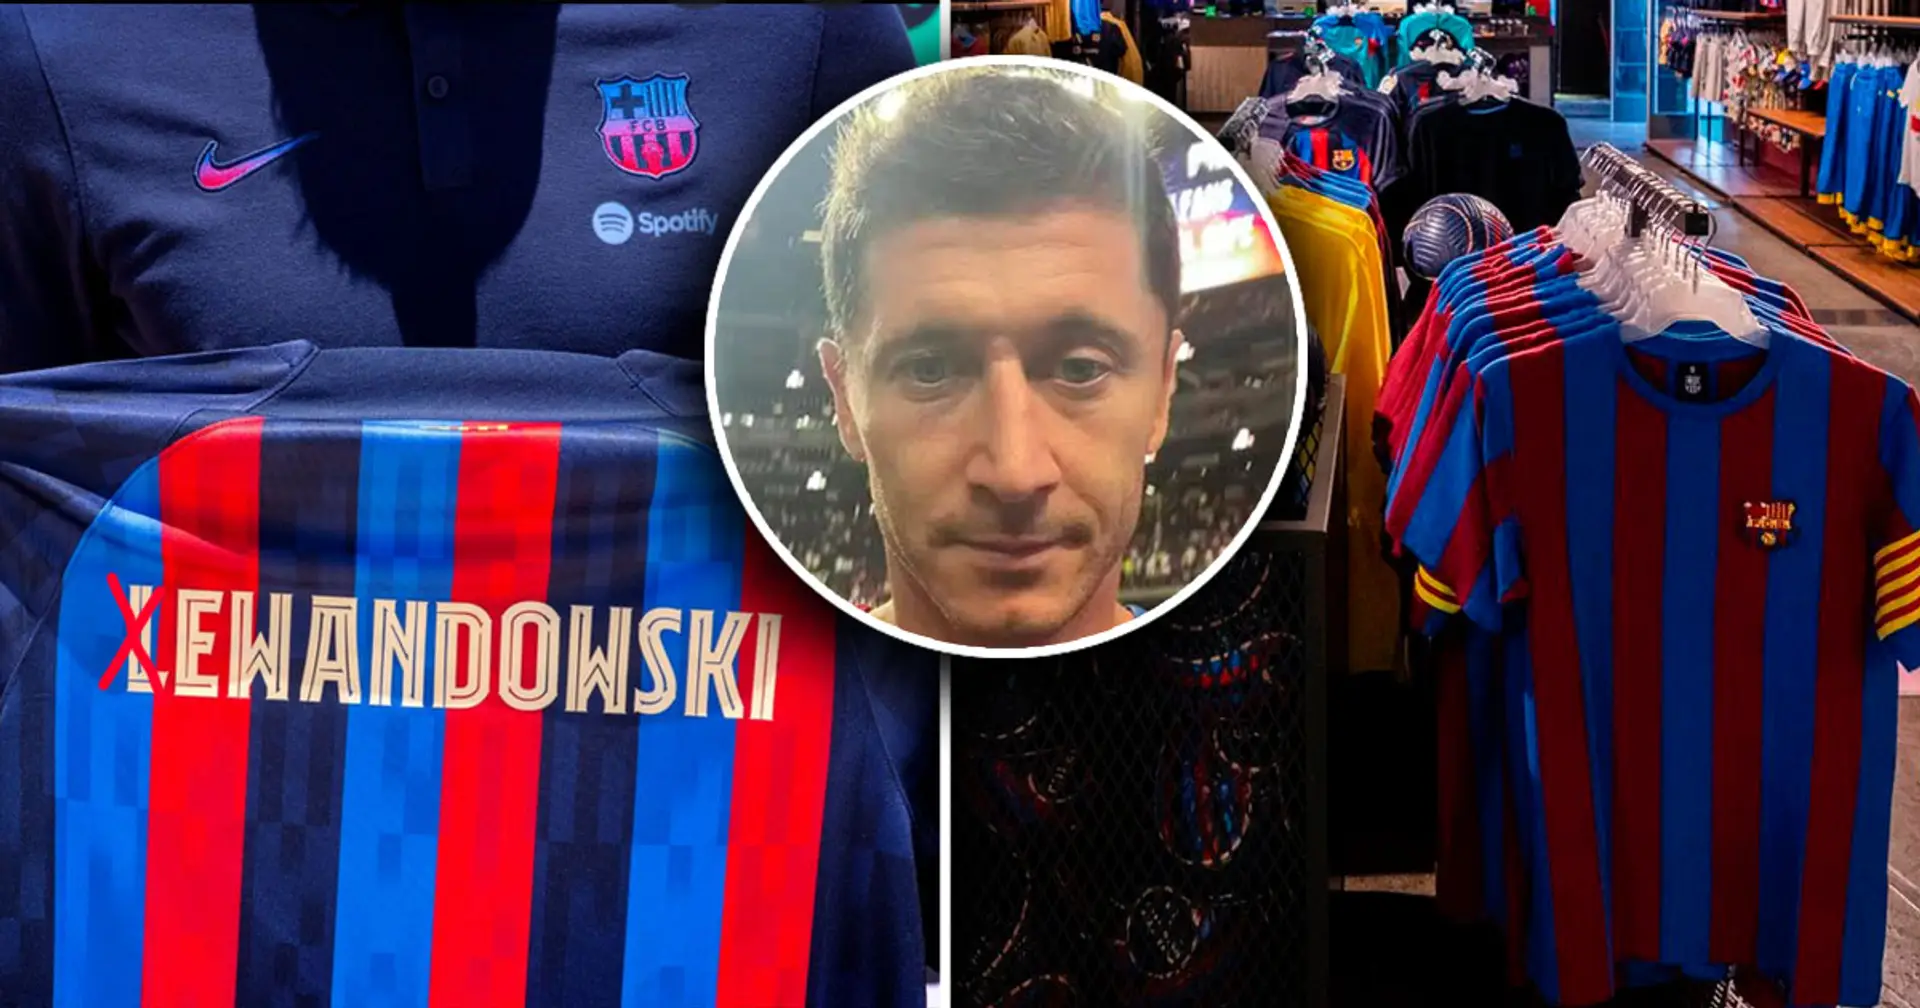 'Total madness': Camp Nou store runs out of letters to print Lewandowski's name again